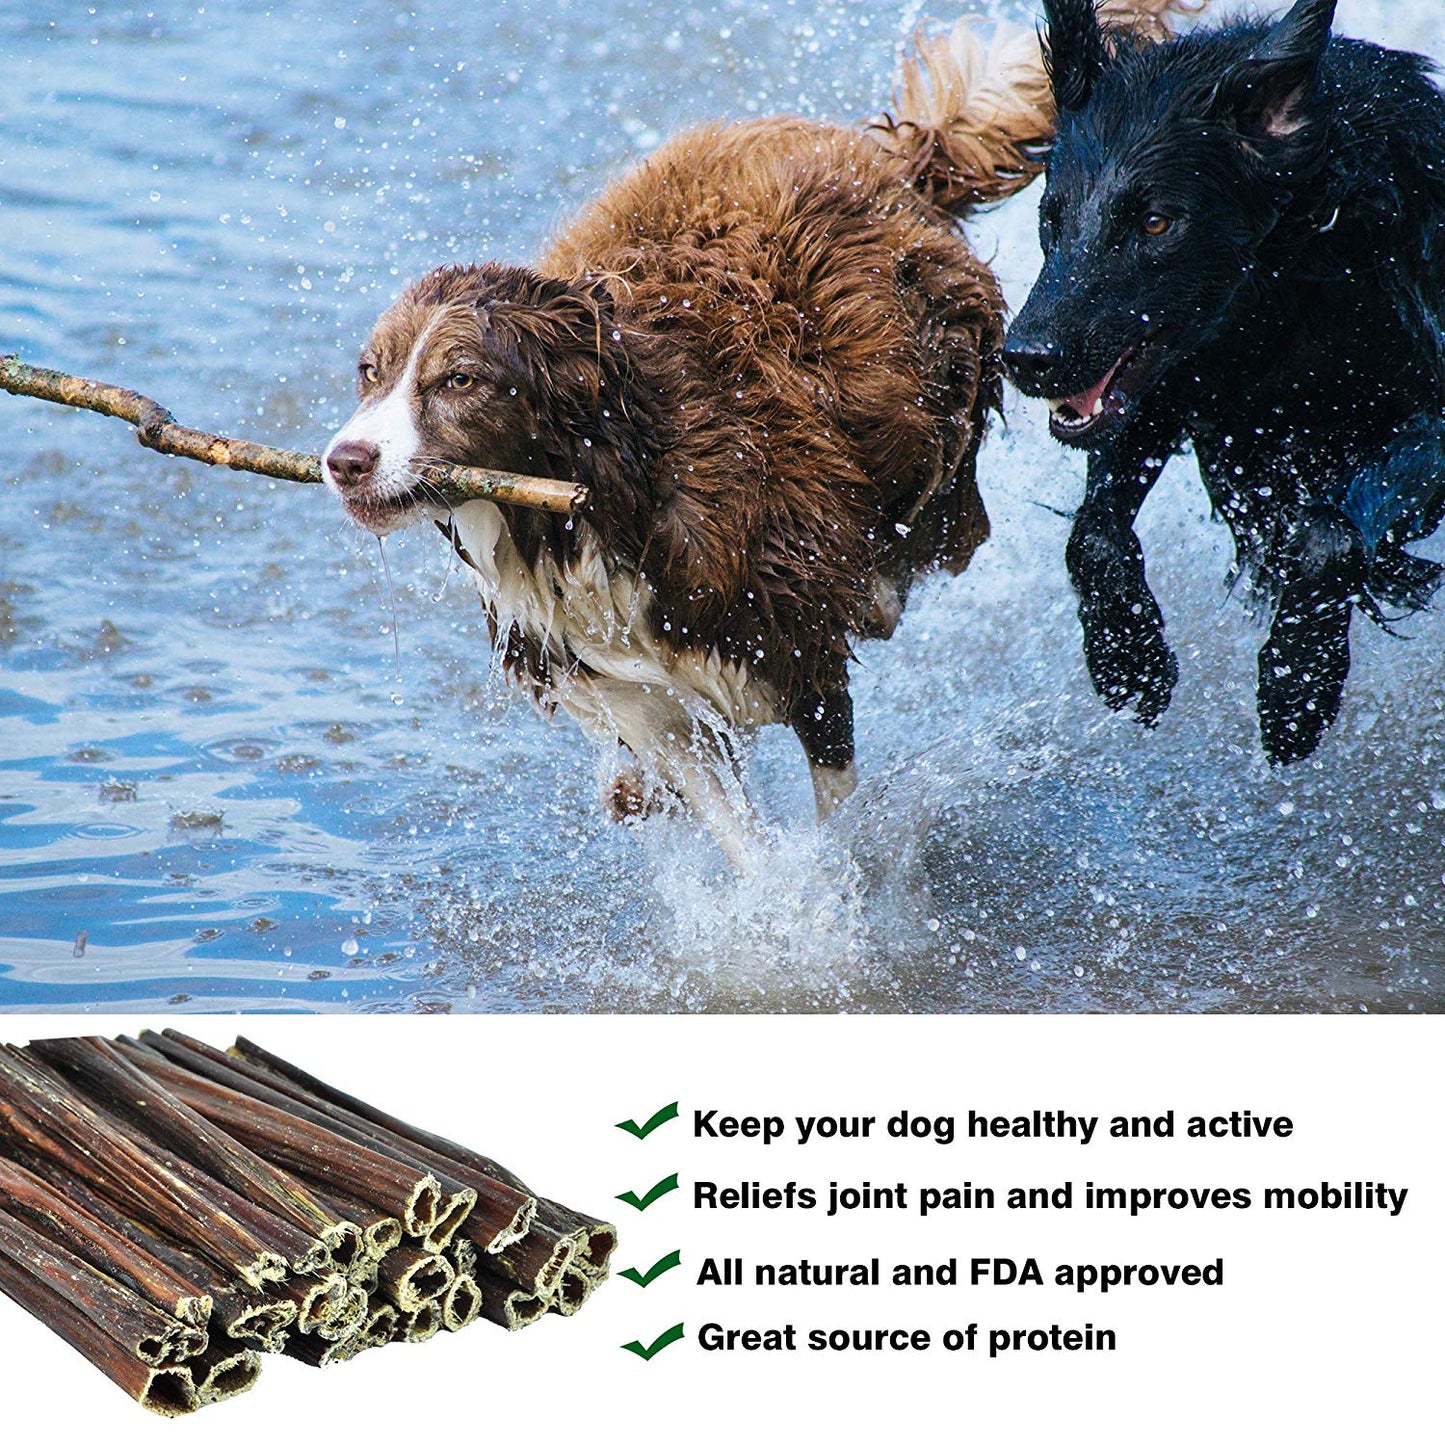 All Natural Dog Beef Gullet Sticks Treats - Healthy Joint Support Chews